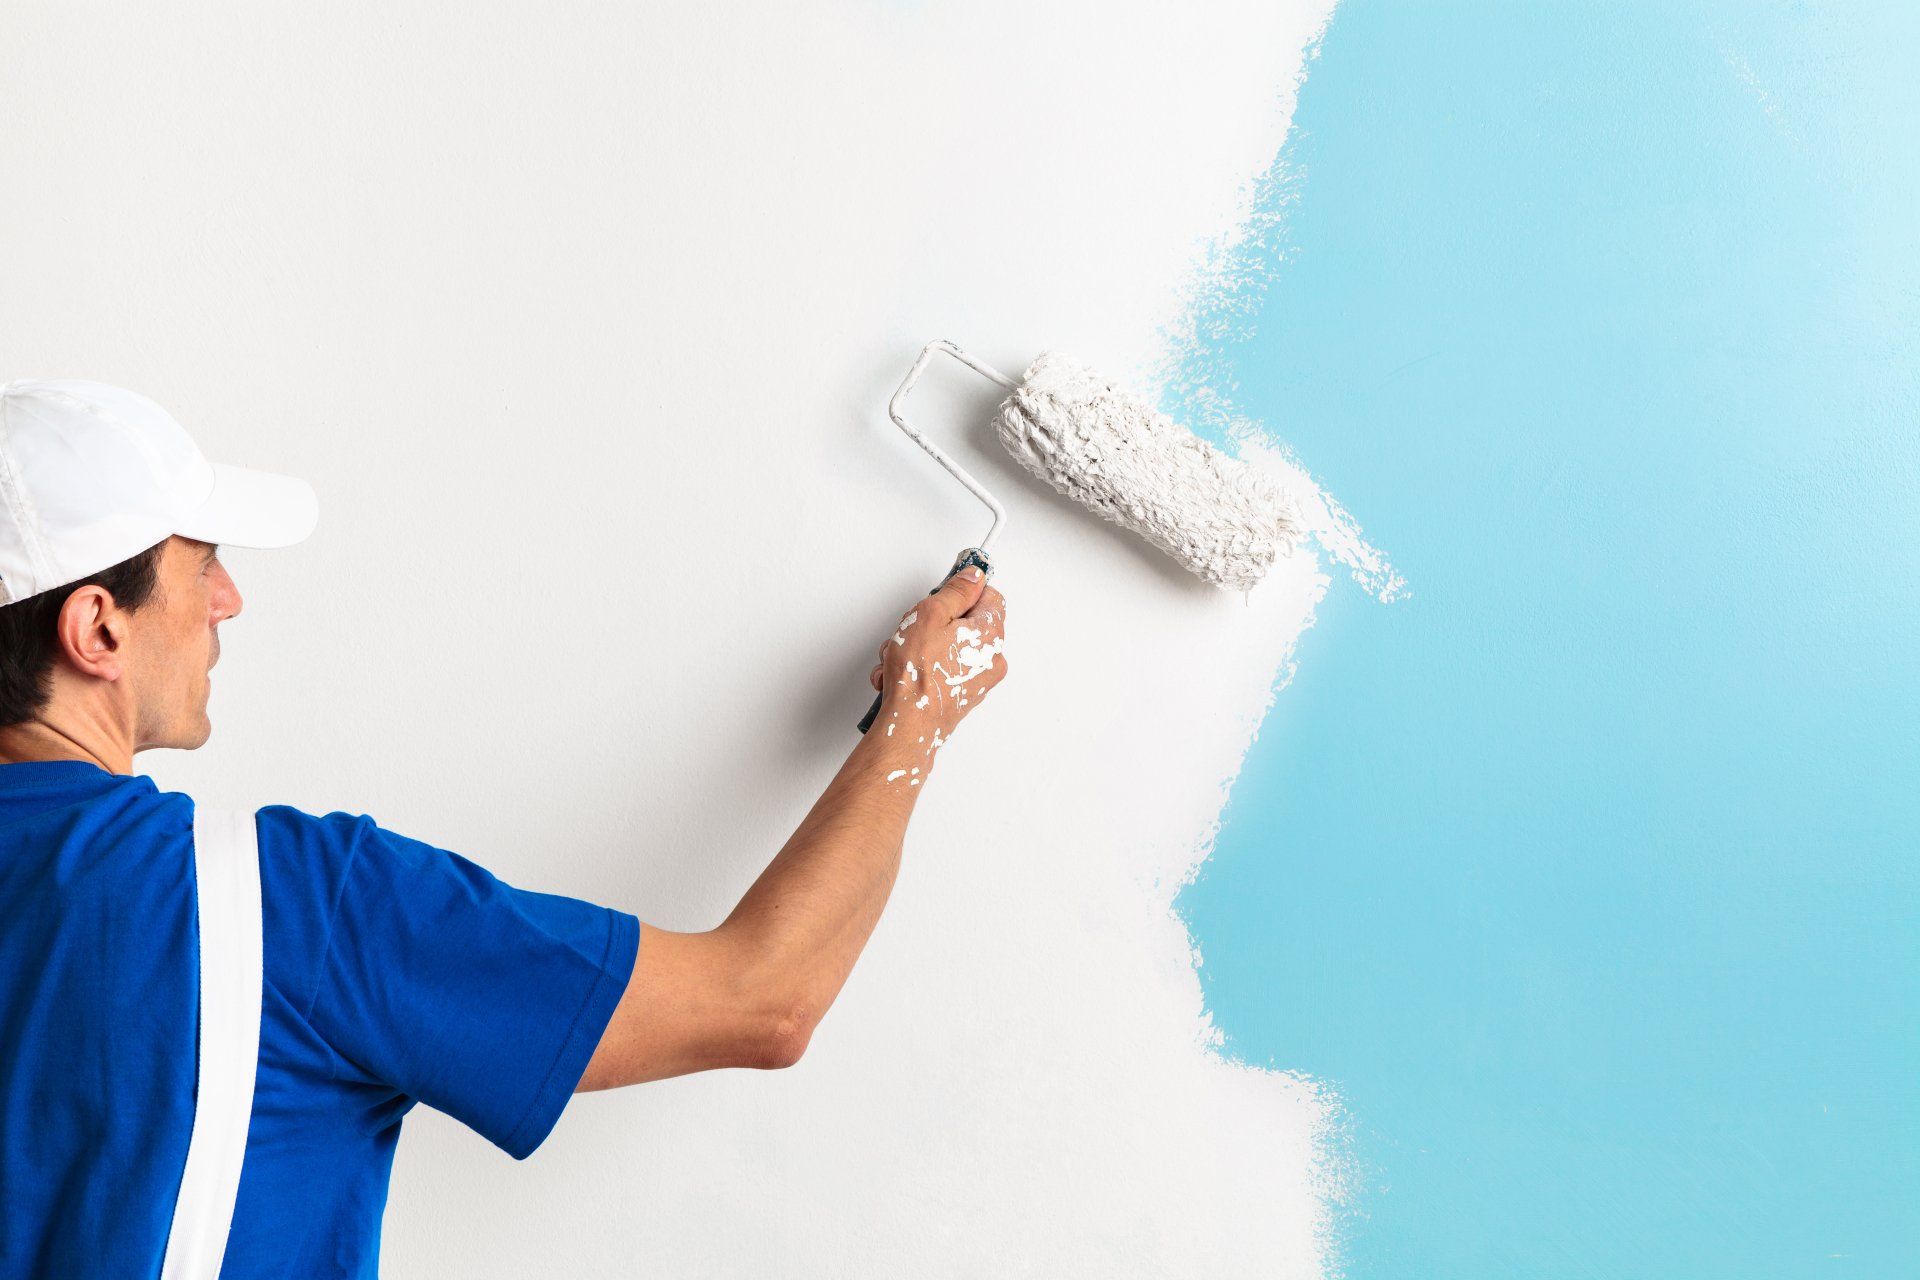 Back view of painter painting a wall with paint roller